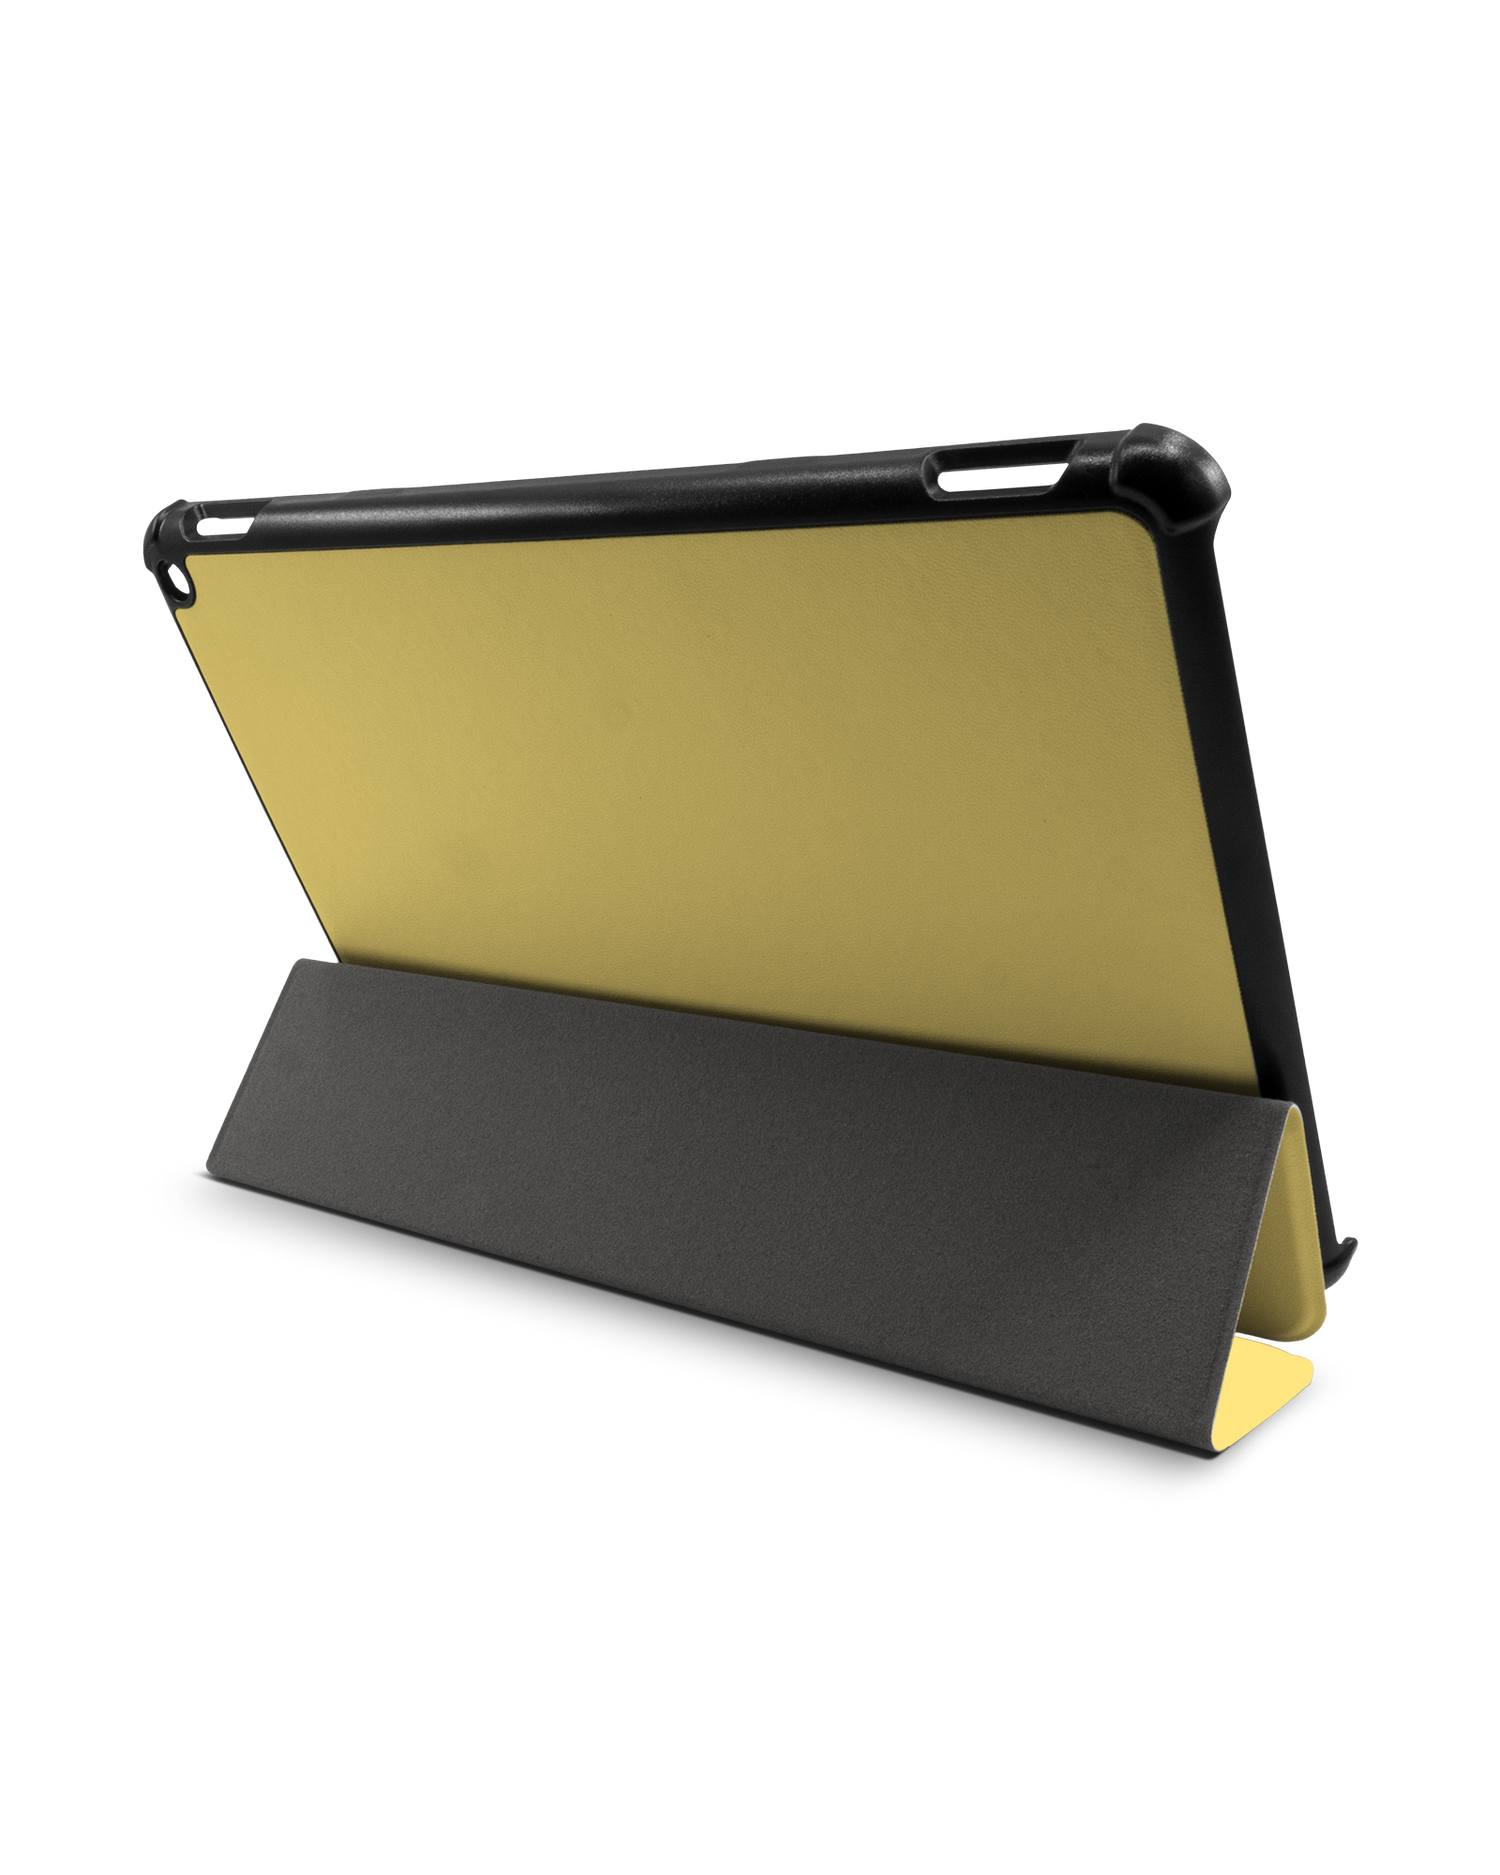 LIGHT YELLOW Tablet Smart Case for Amazon Fire HD 10 (2021): Used as Stand